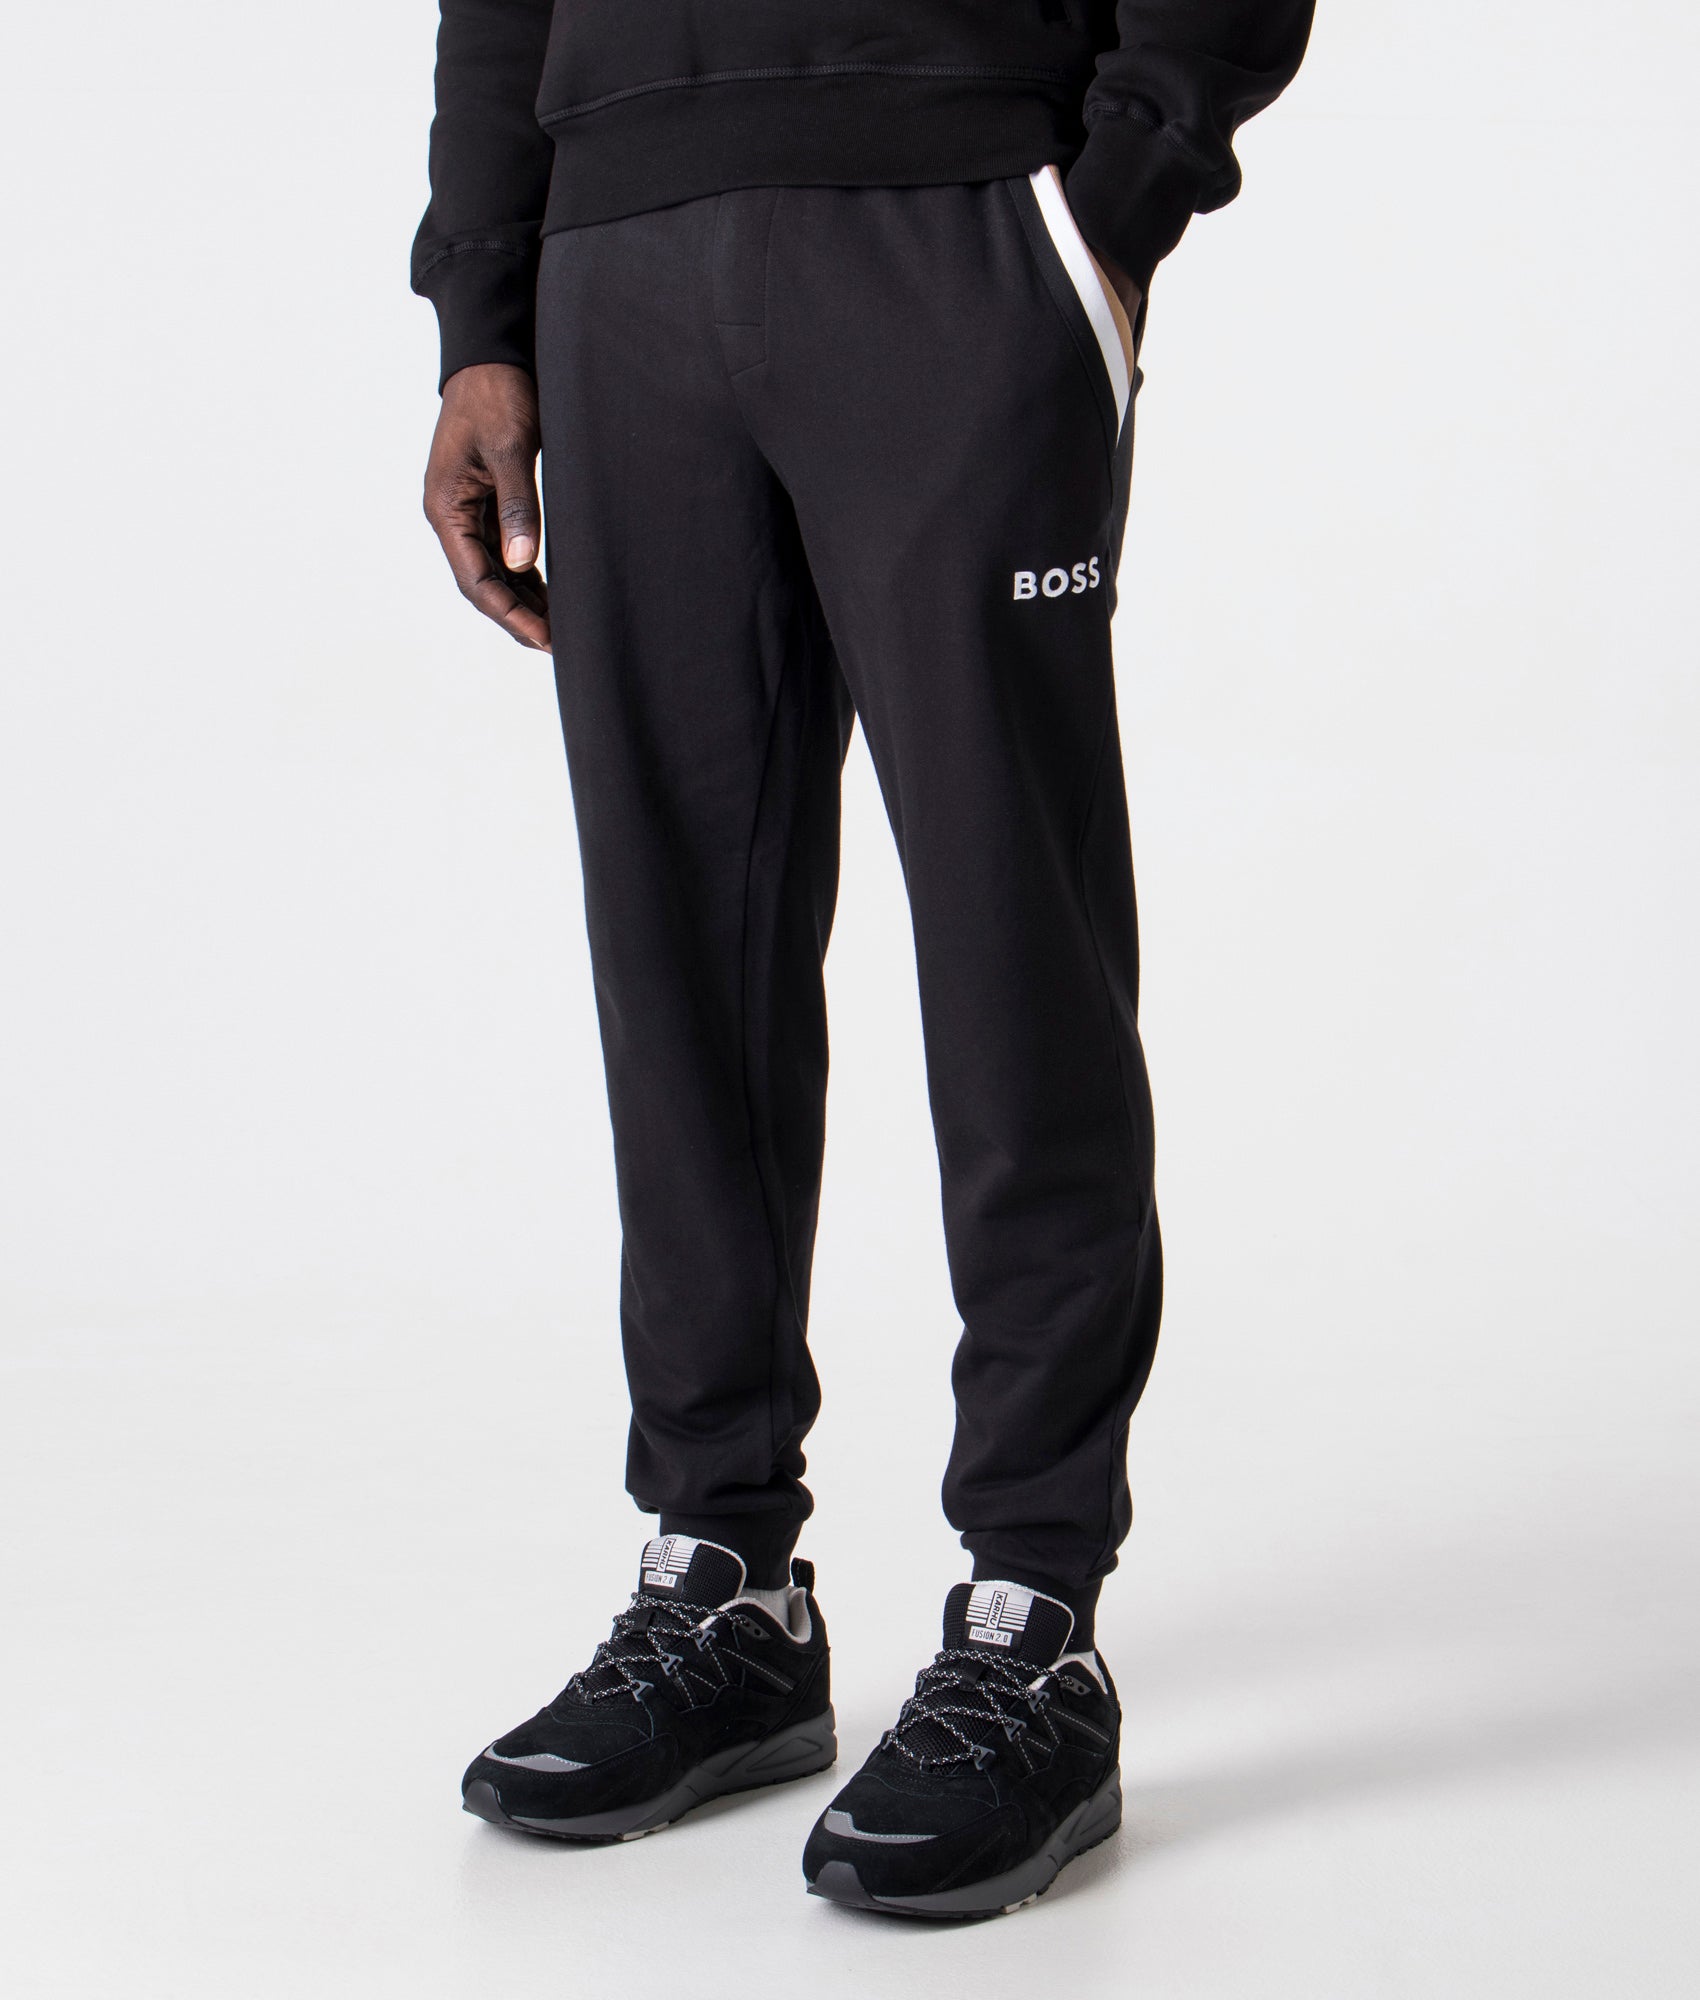 BOSS Mens Iconic Joggers - Colour: 001 Black - Size: Small